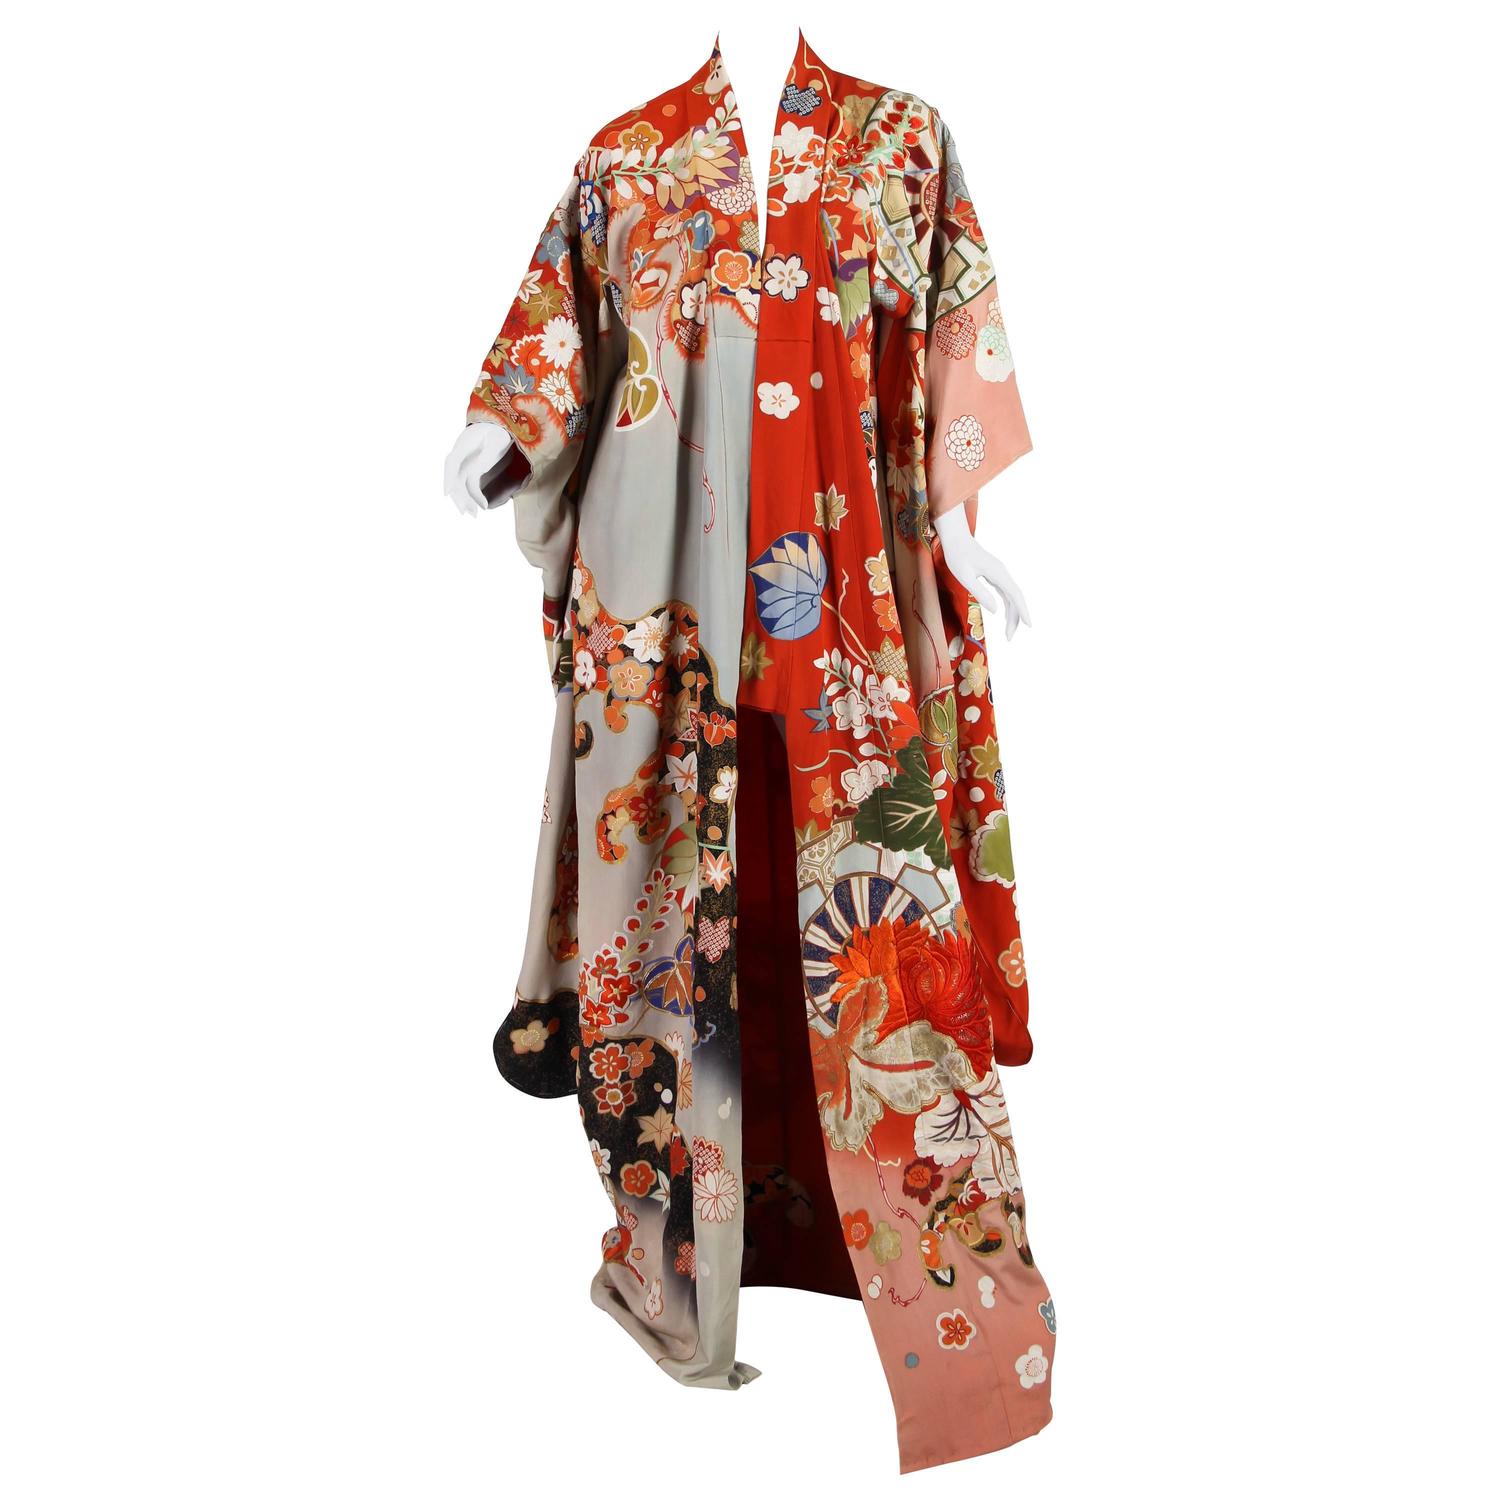 Very fine Hand Painted and Embroidered Antique Japanese Kimono For Sale ...